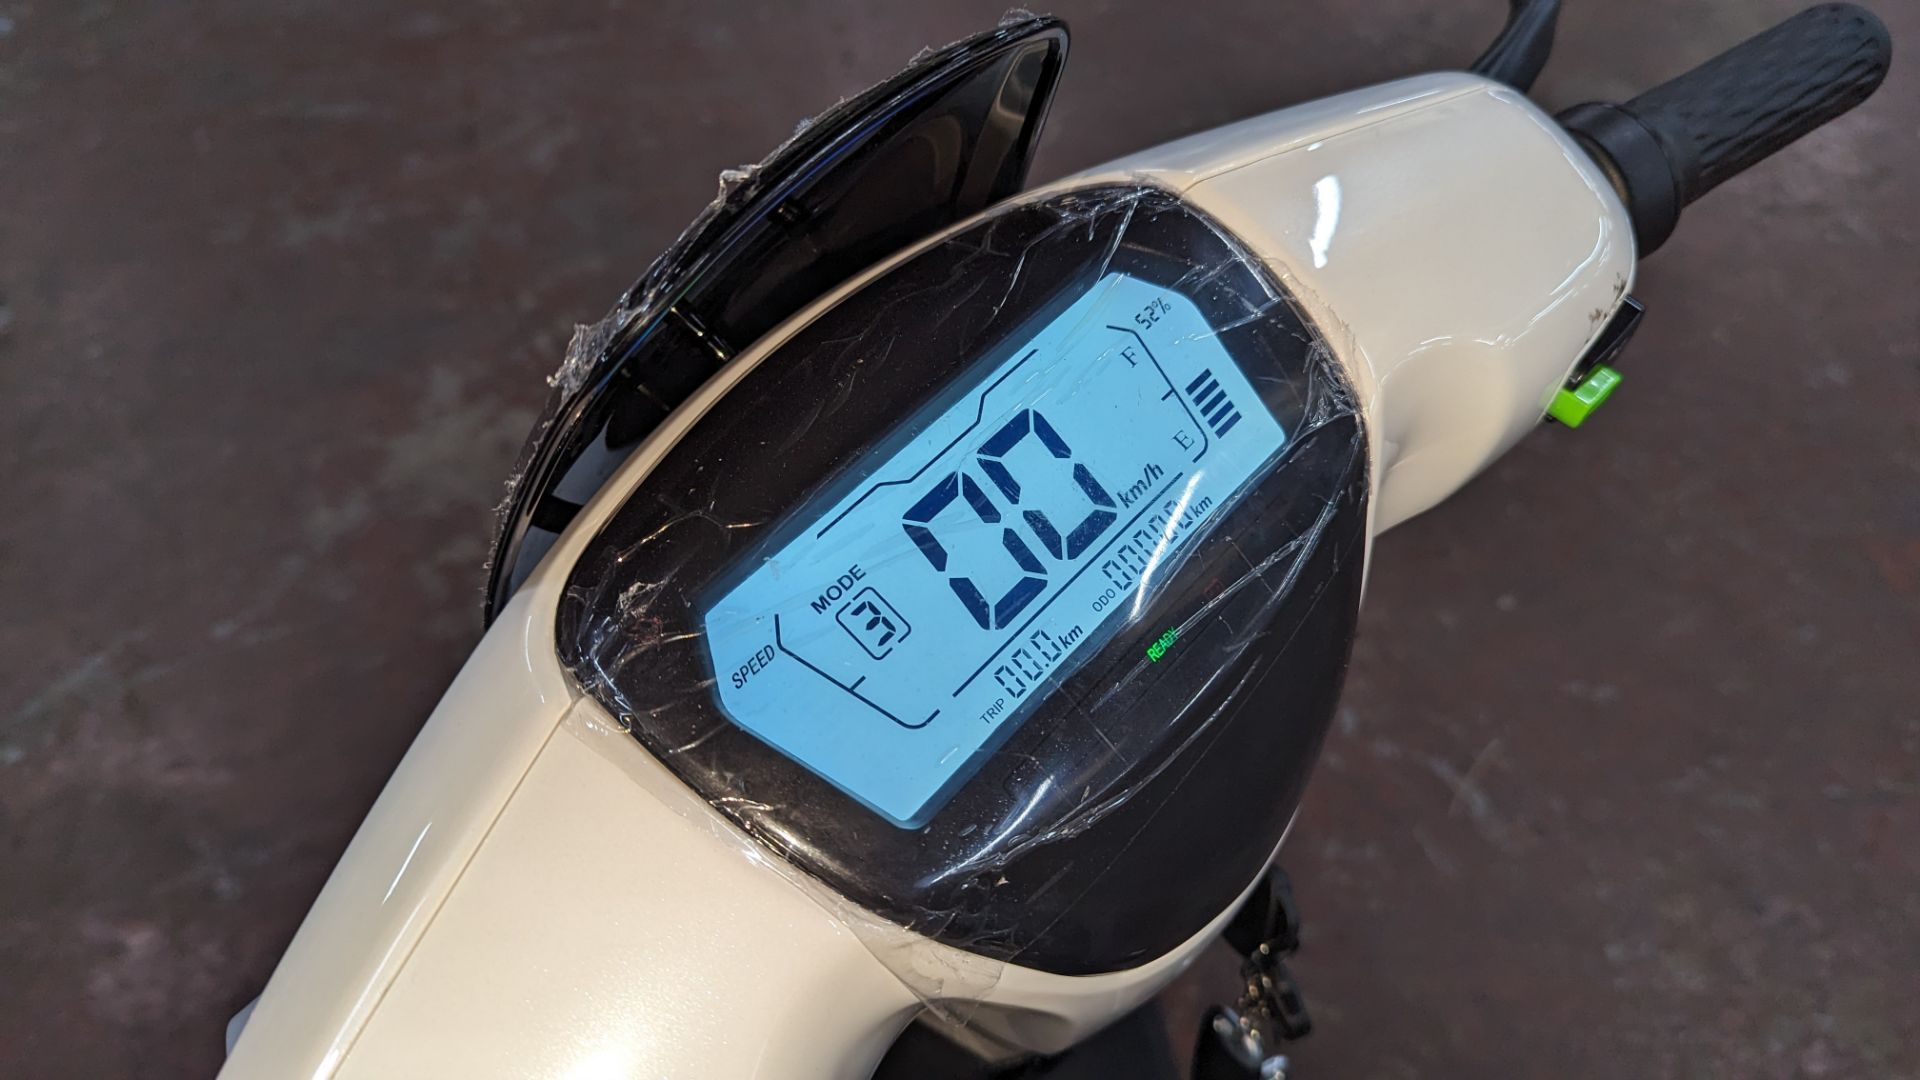 Model 18 Electric Bike: Zero (0) recorded miles, white body with black detailing, insulated box moun - Image 8 of 11